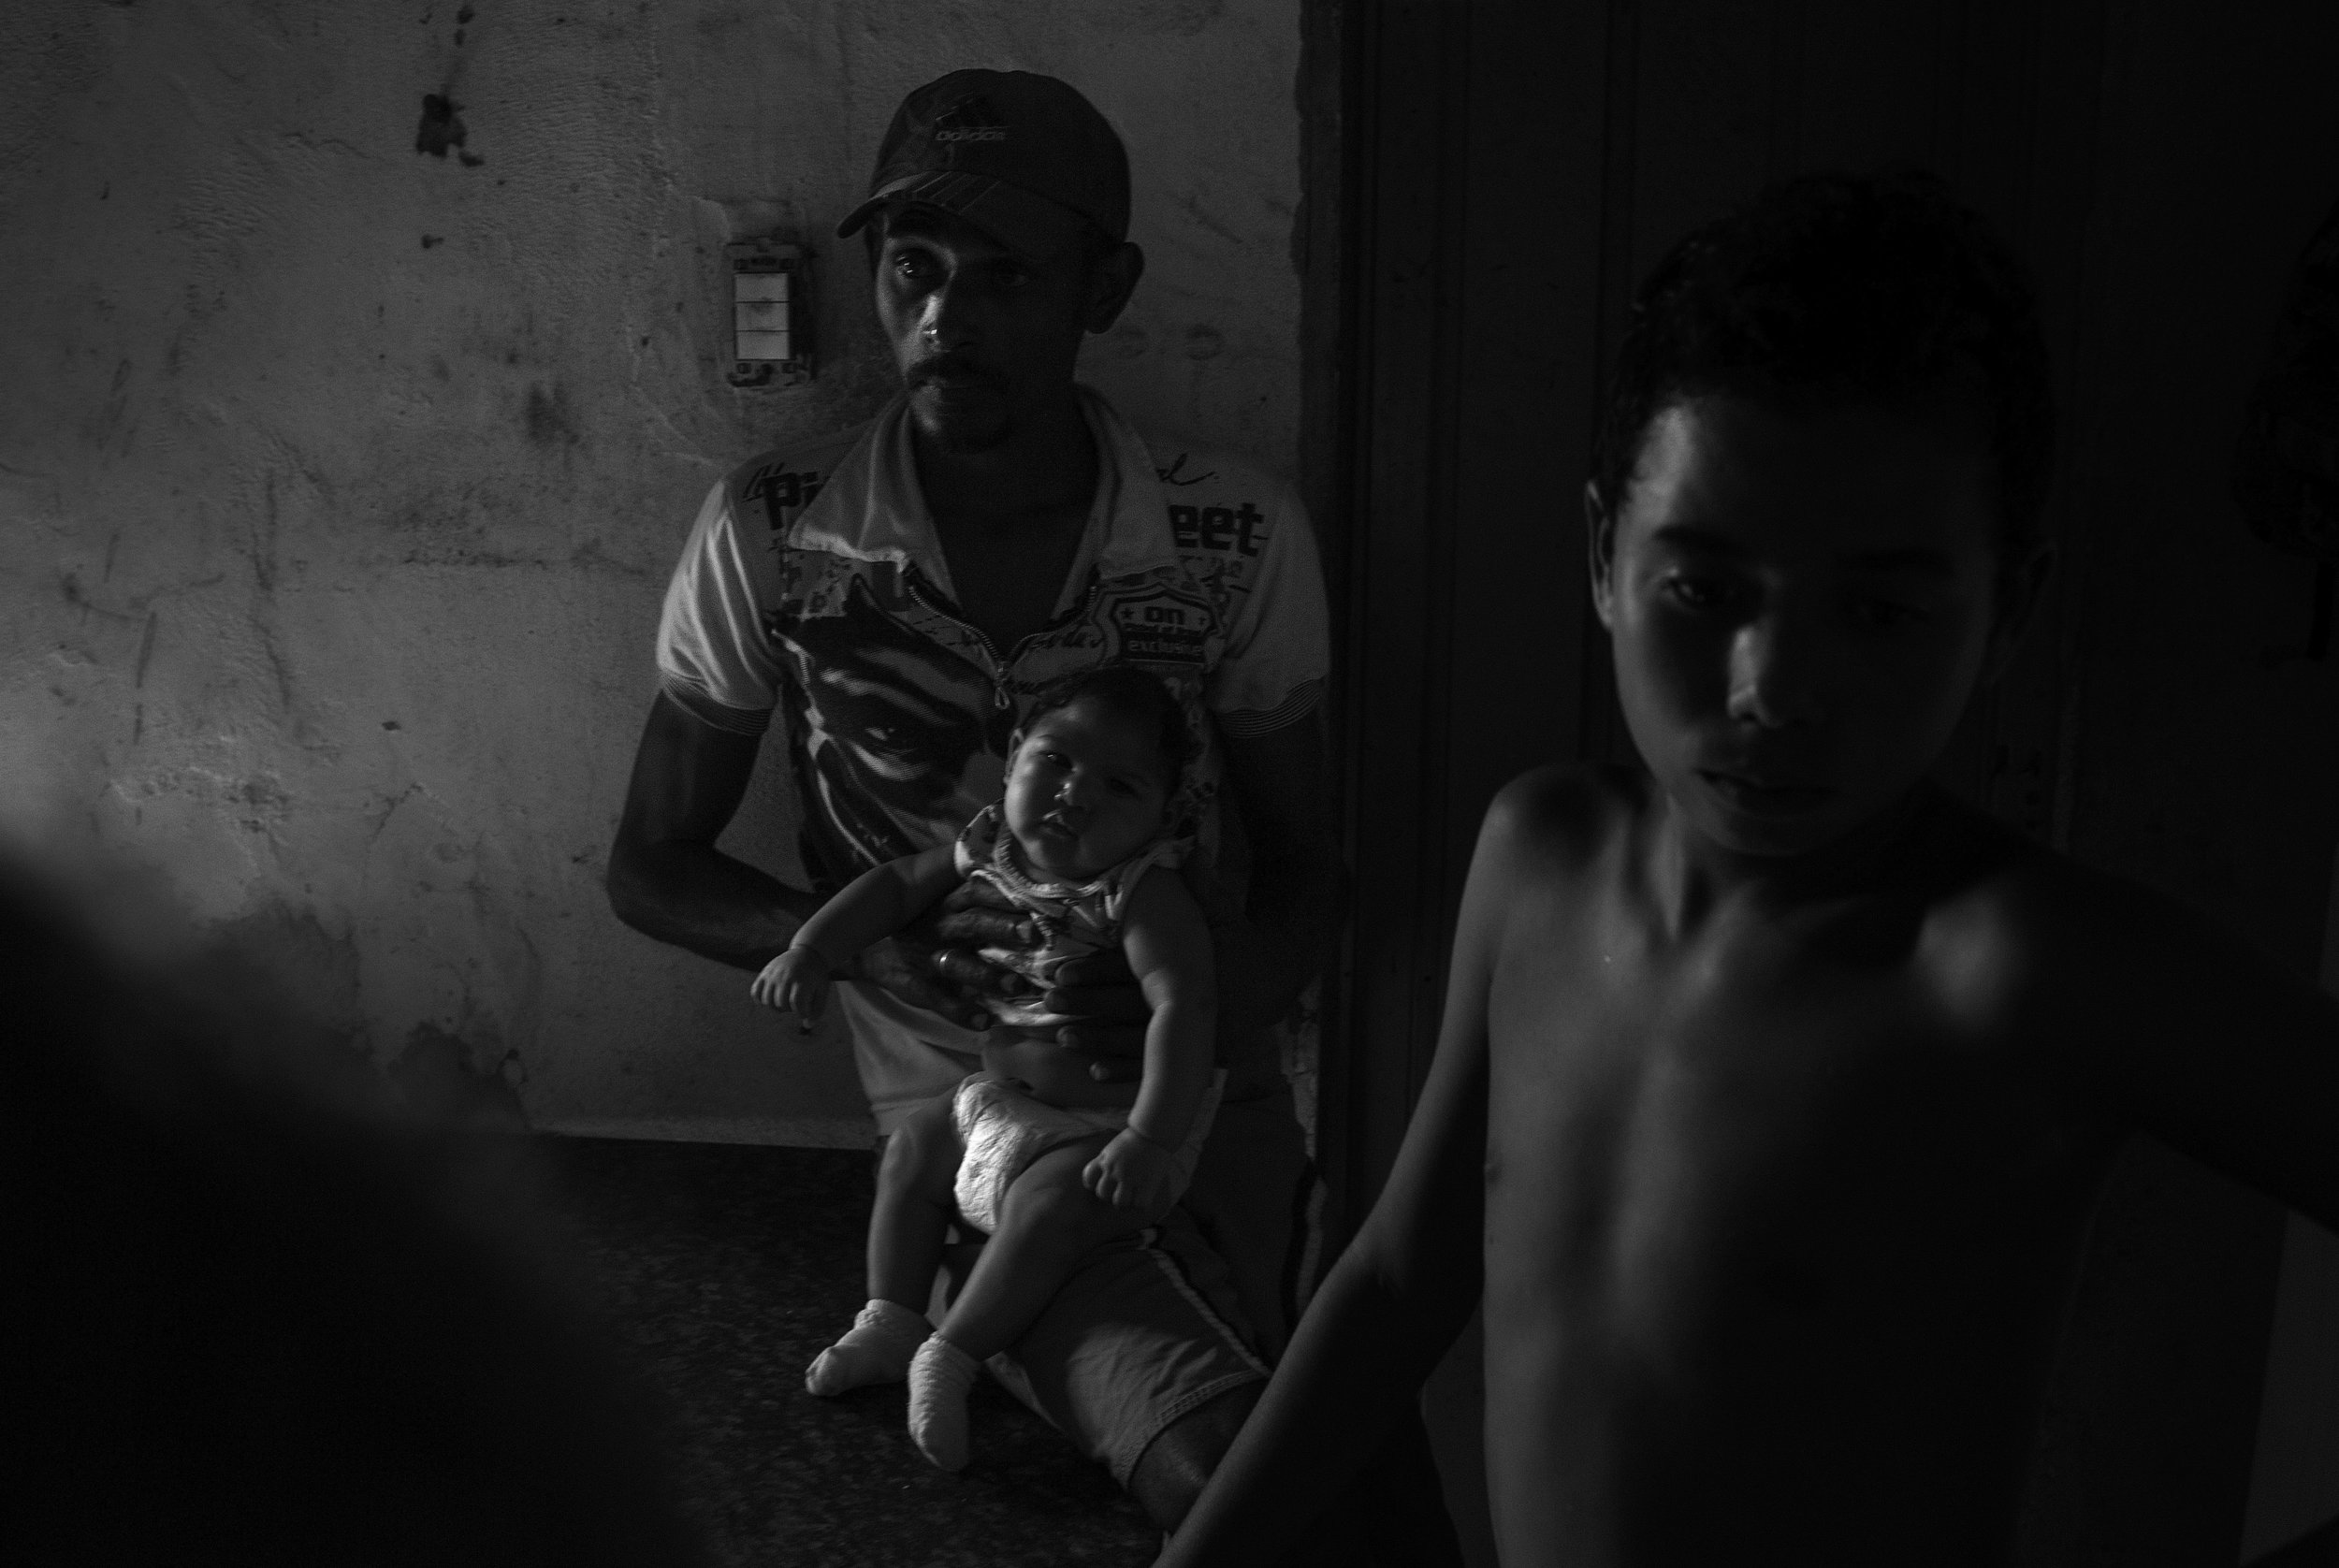  Alexandre Santiago holds his son, Samuel Amorim, who was born with microcephaly, in their home in one of Campina Grande’s poorest neighborhoods. Before Samuel was born, Alexandre and his wife, Alessandra de Sousa Amorim, both worked outside of the h